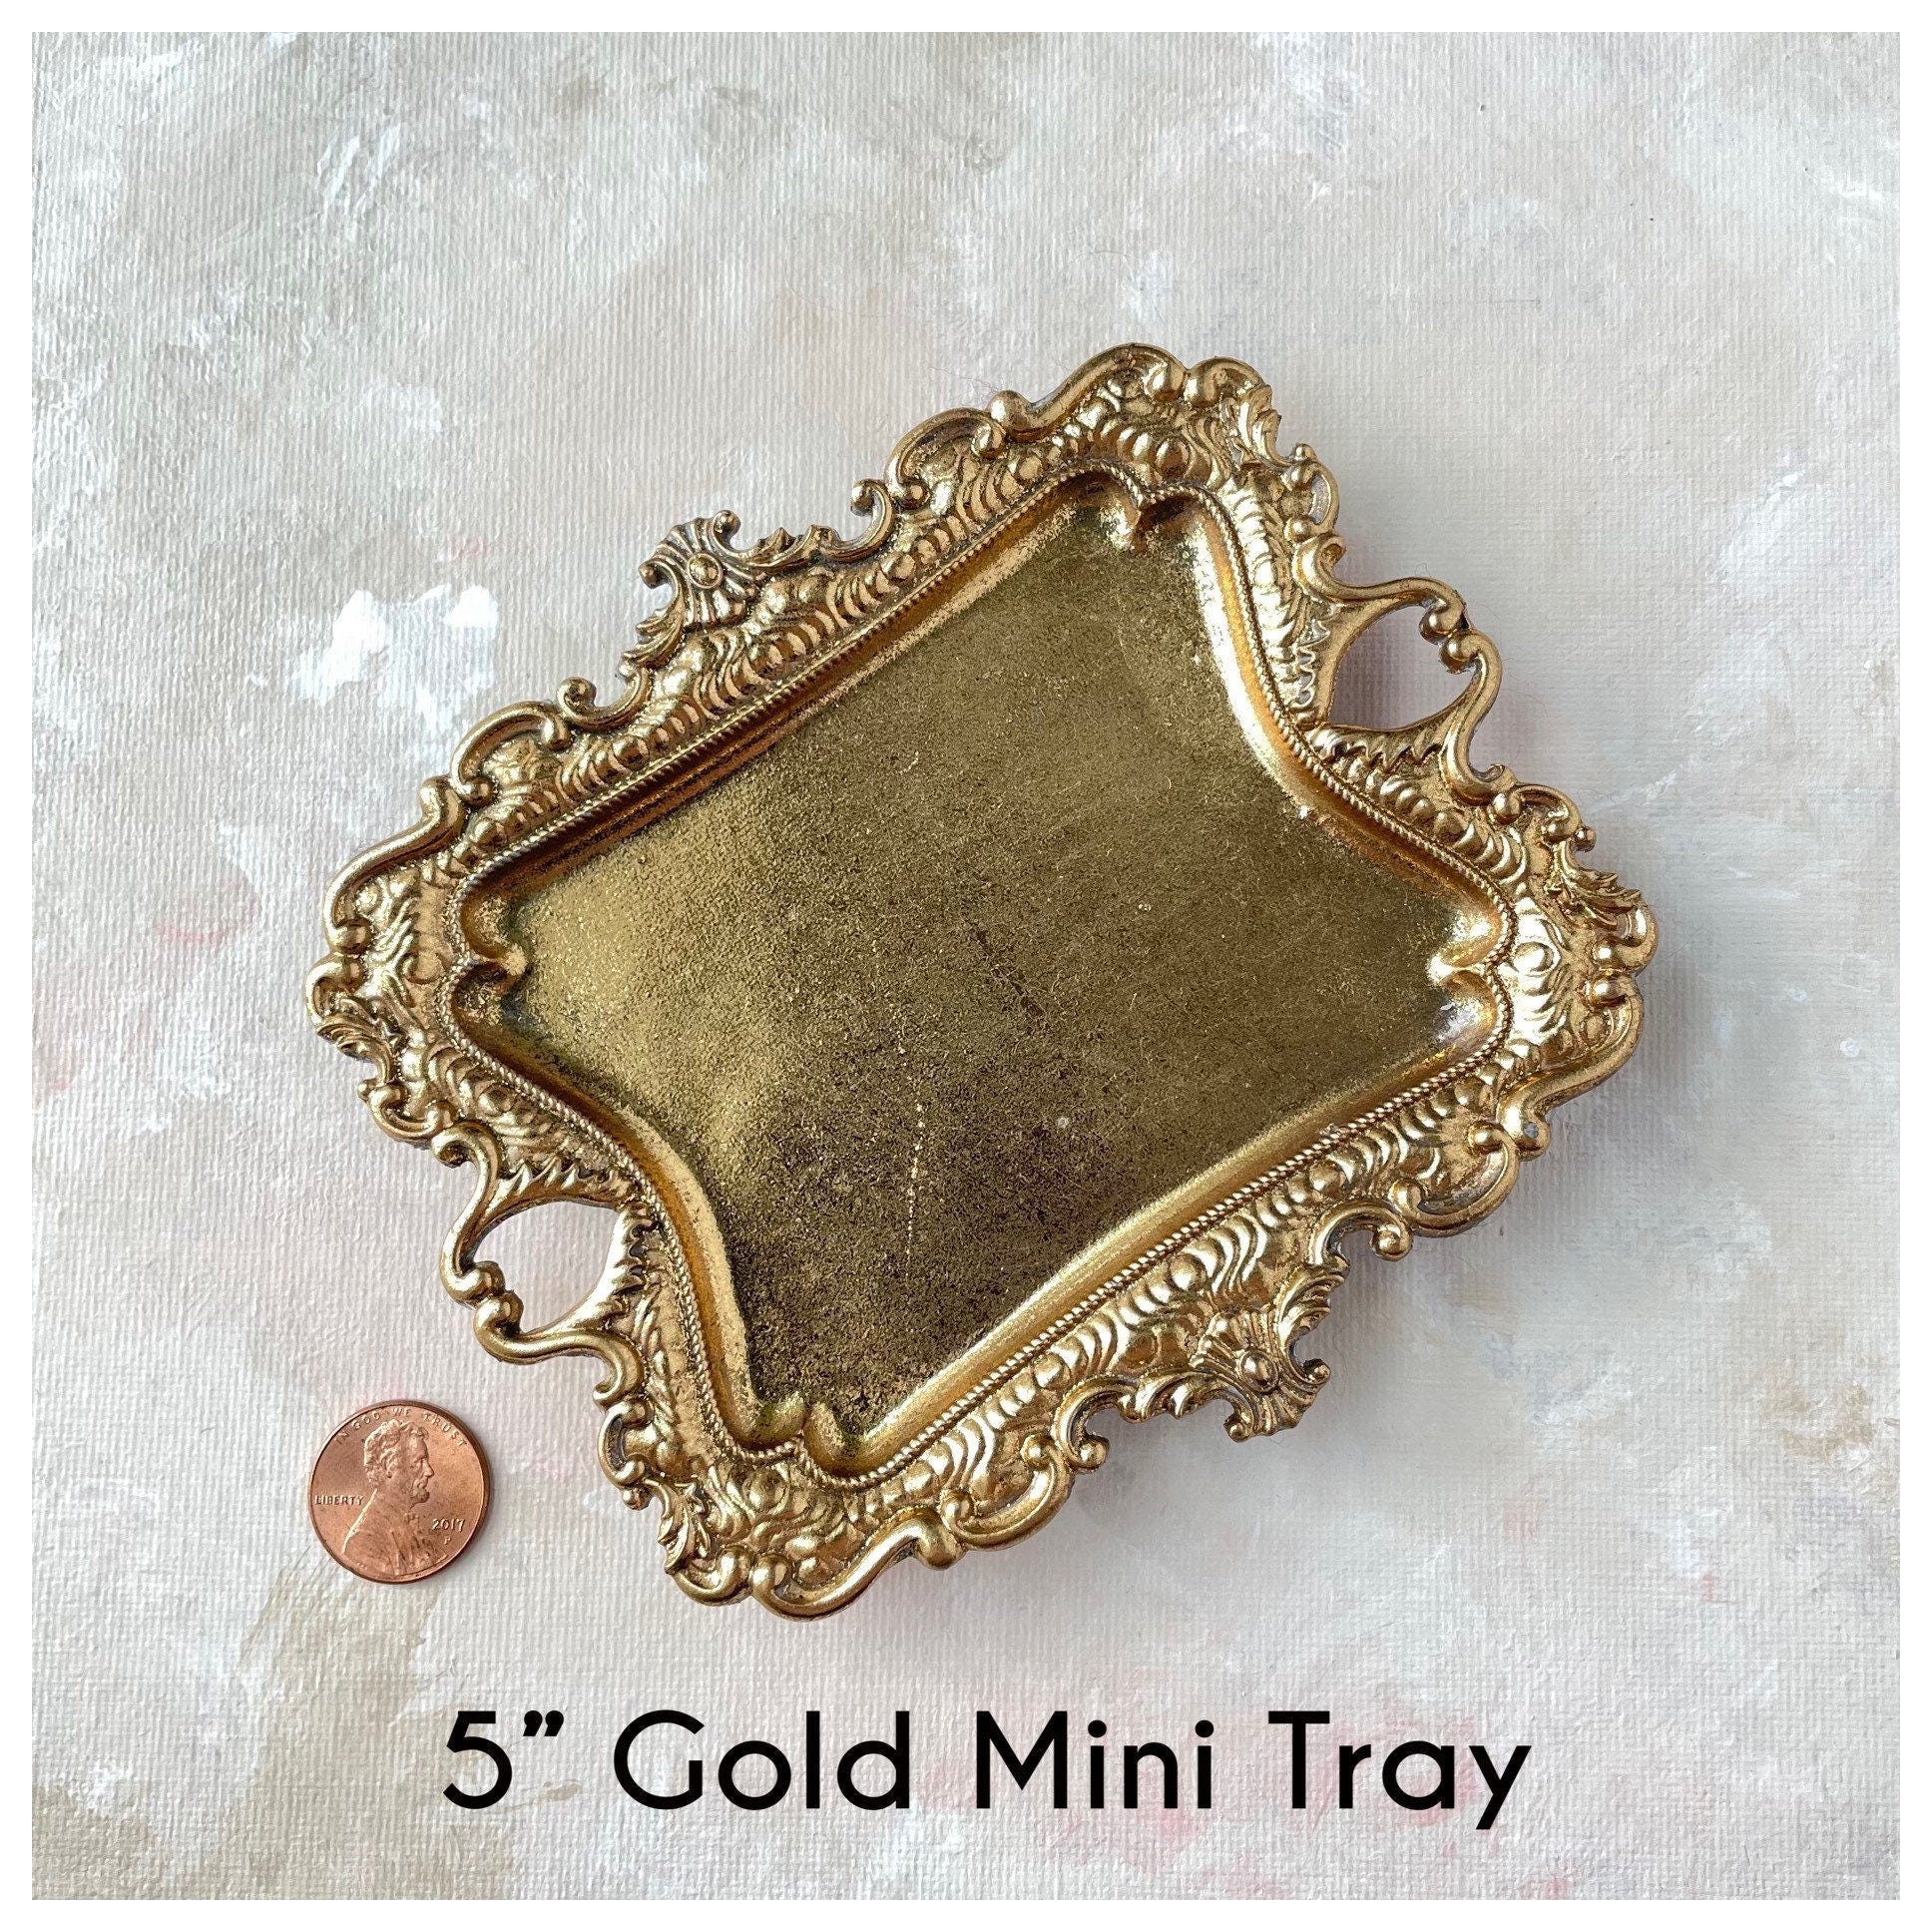  Gold vintage tray for wedding flay lay with penny beside for size reference - Flat lay props from Champagne & GRIT